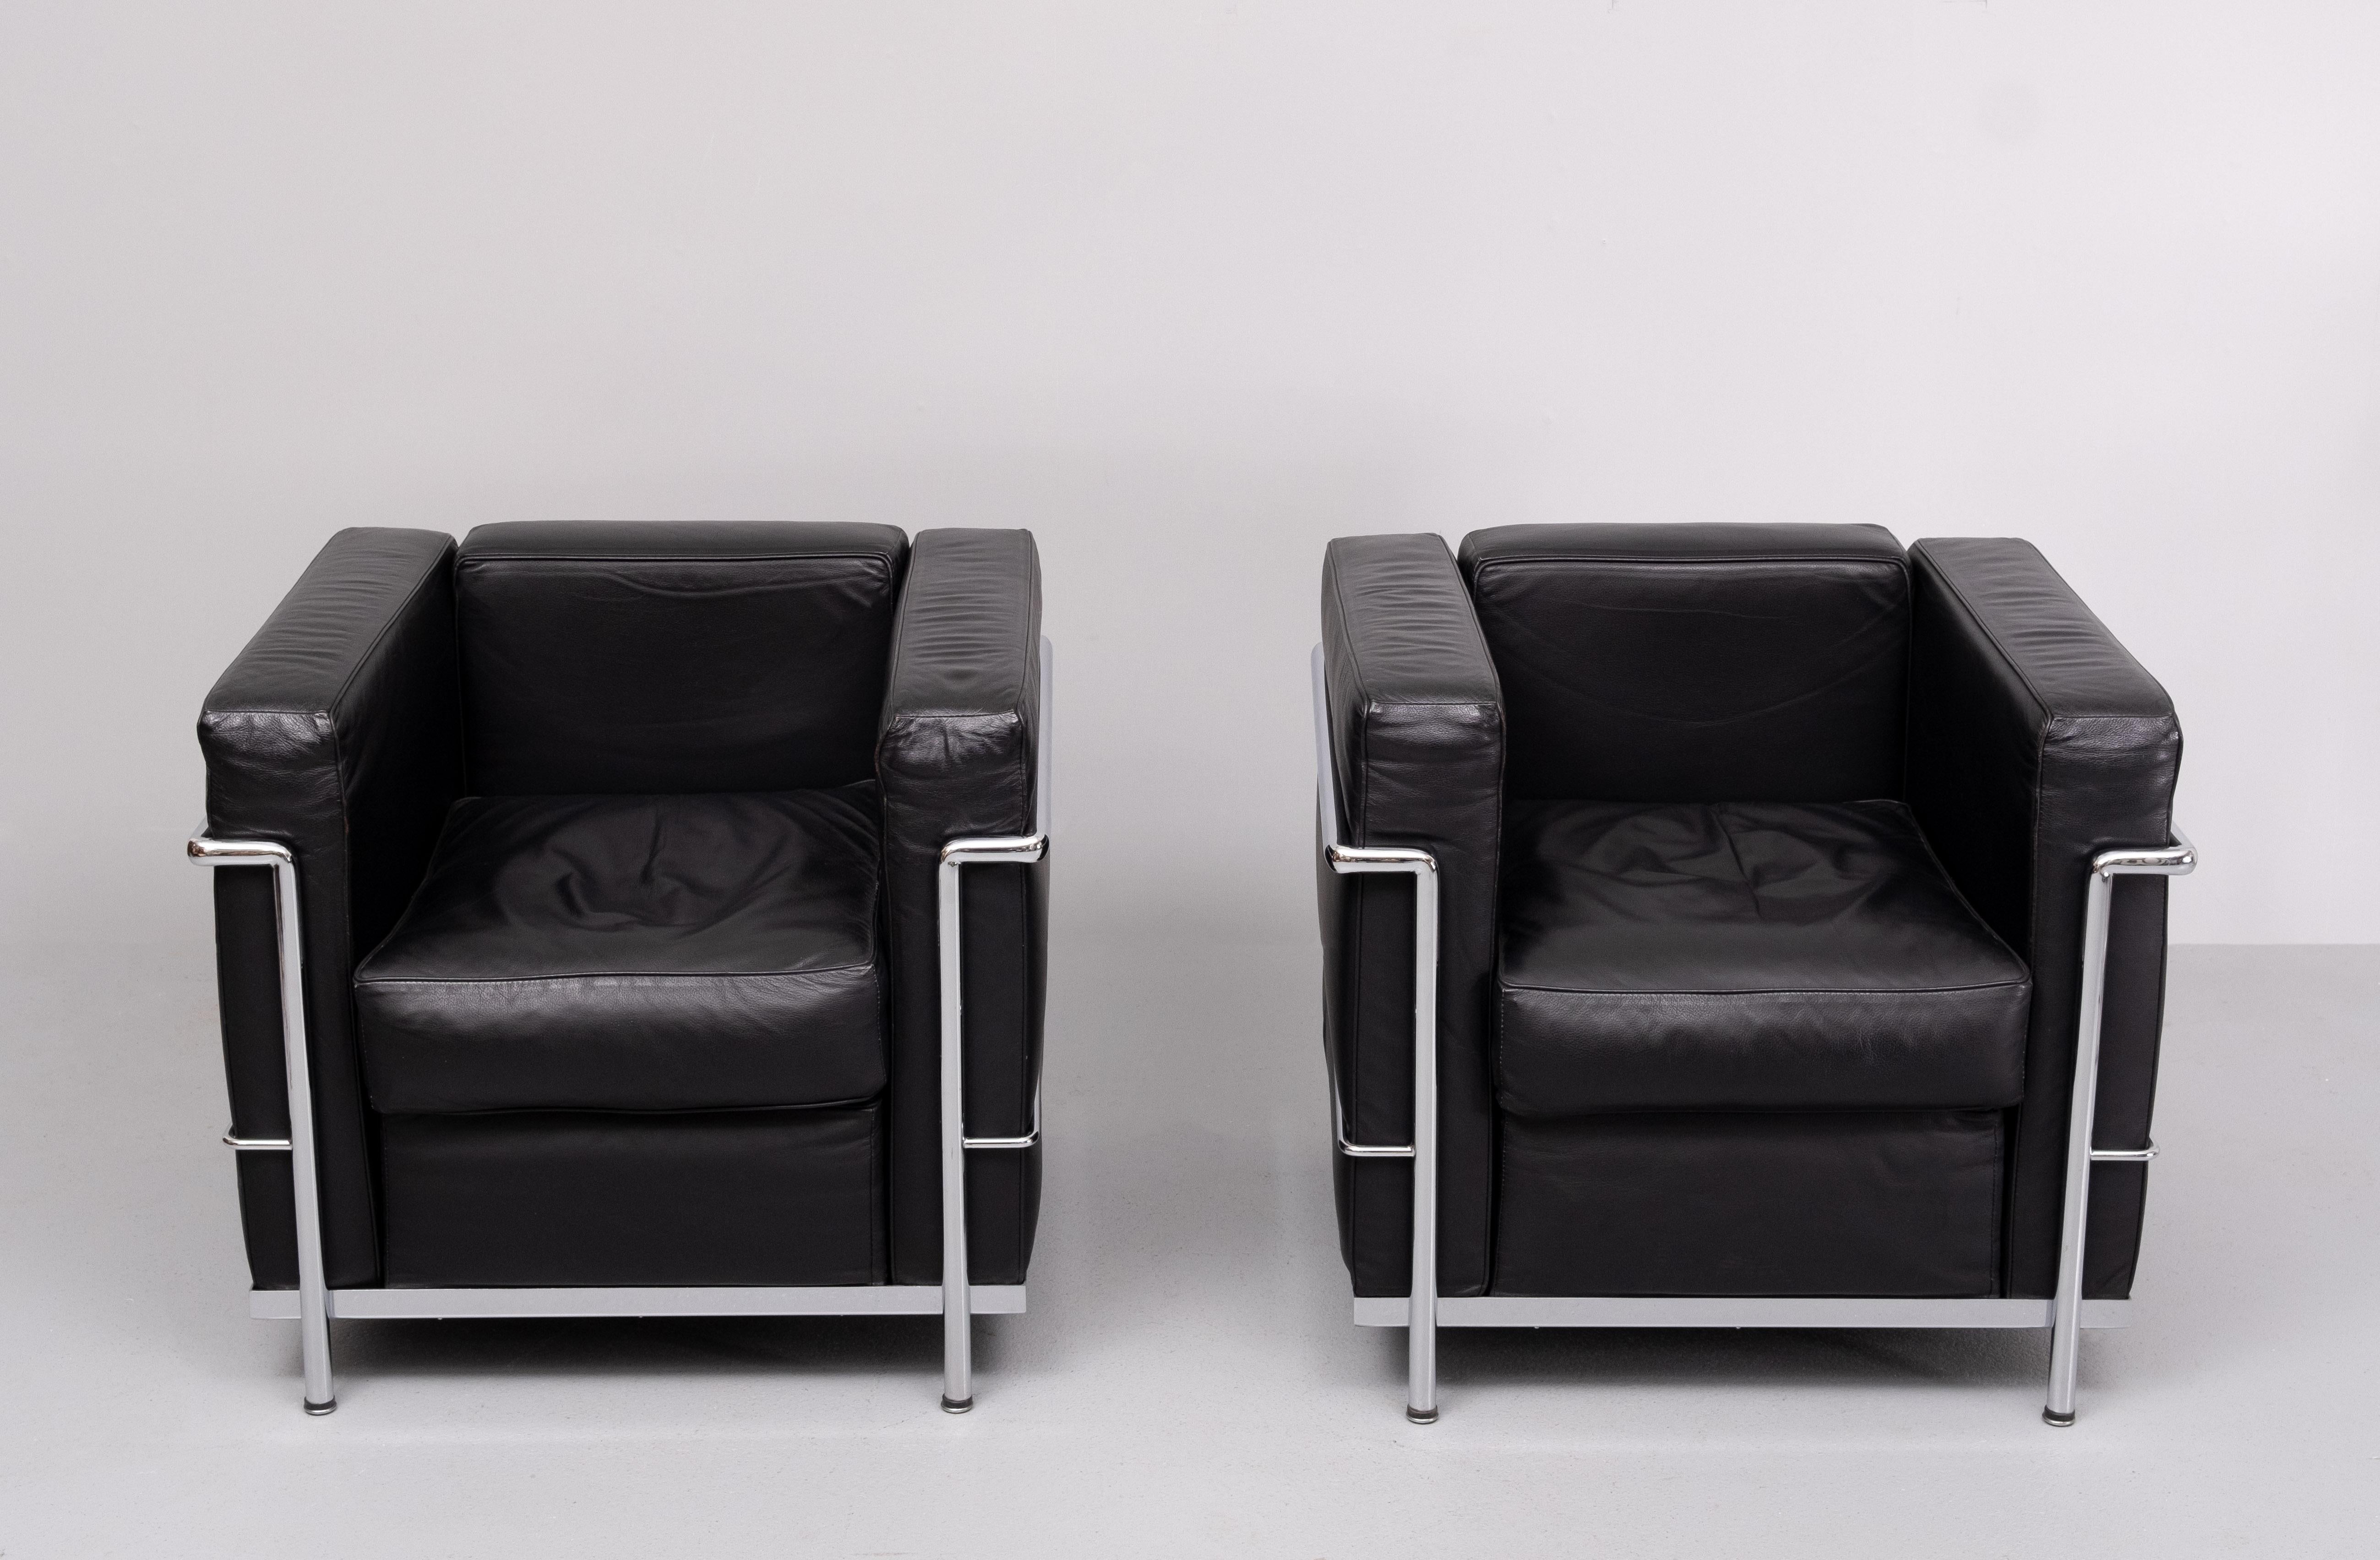 Beautiful pair of  LC2 armchairs by Le Corbusier .Black Leather 
upholstery . On a Chrome on Steel frame . Manufactured by Alivar 
Italy 1990s . Very Good quality chairs . Comes with just the right amount 
of patine . Good seating comfort .